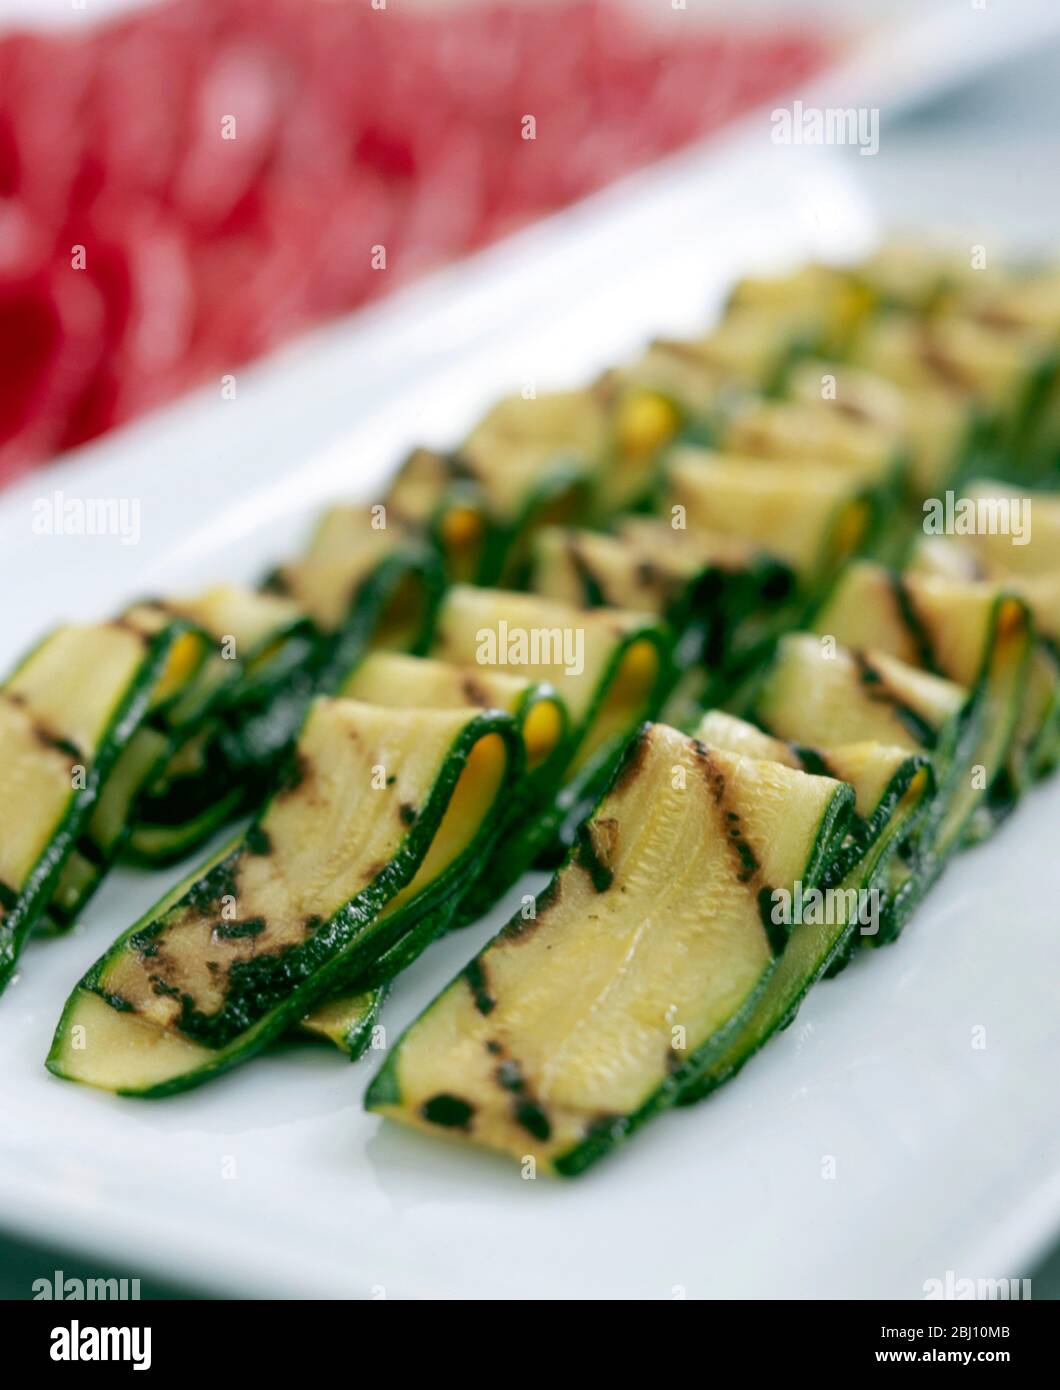 Grilled marinated courgette strips arranged on white plate - Stock Photo